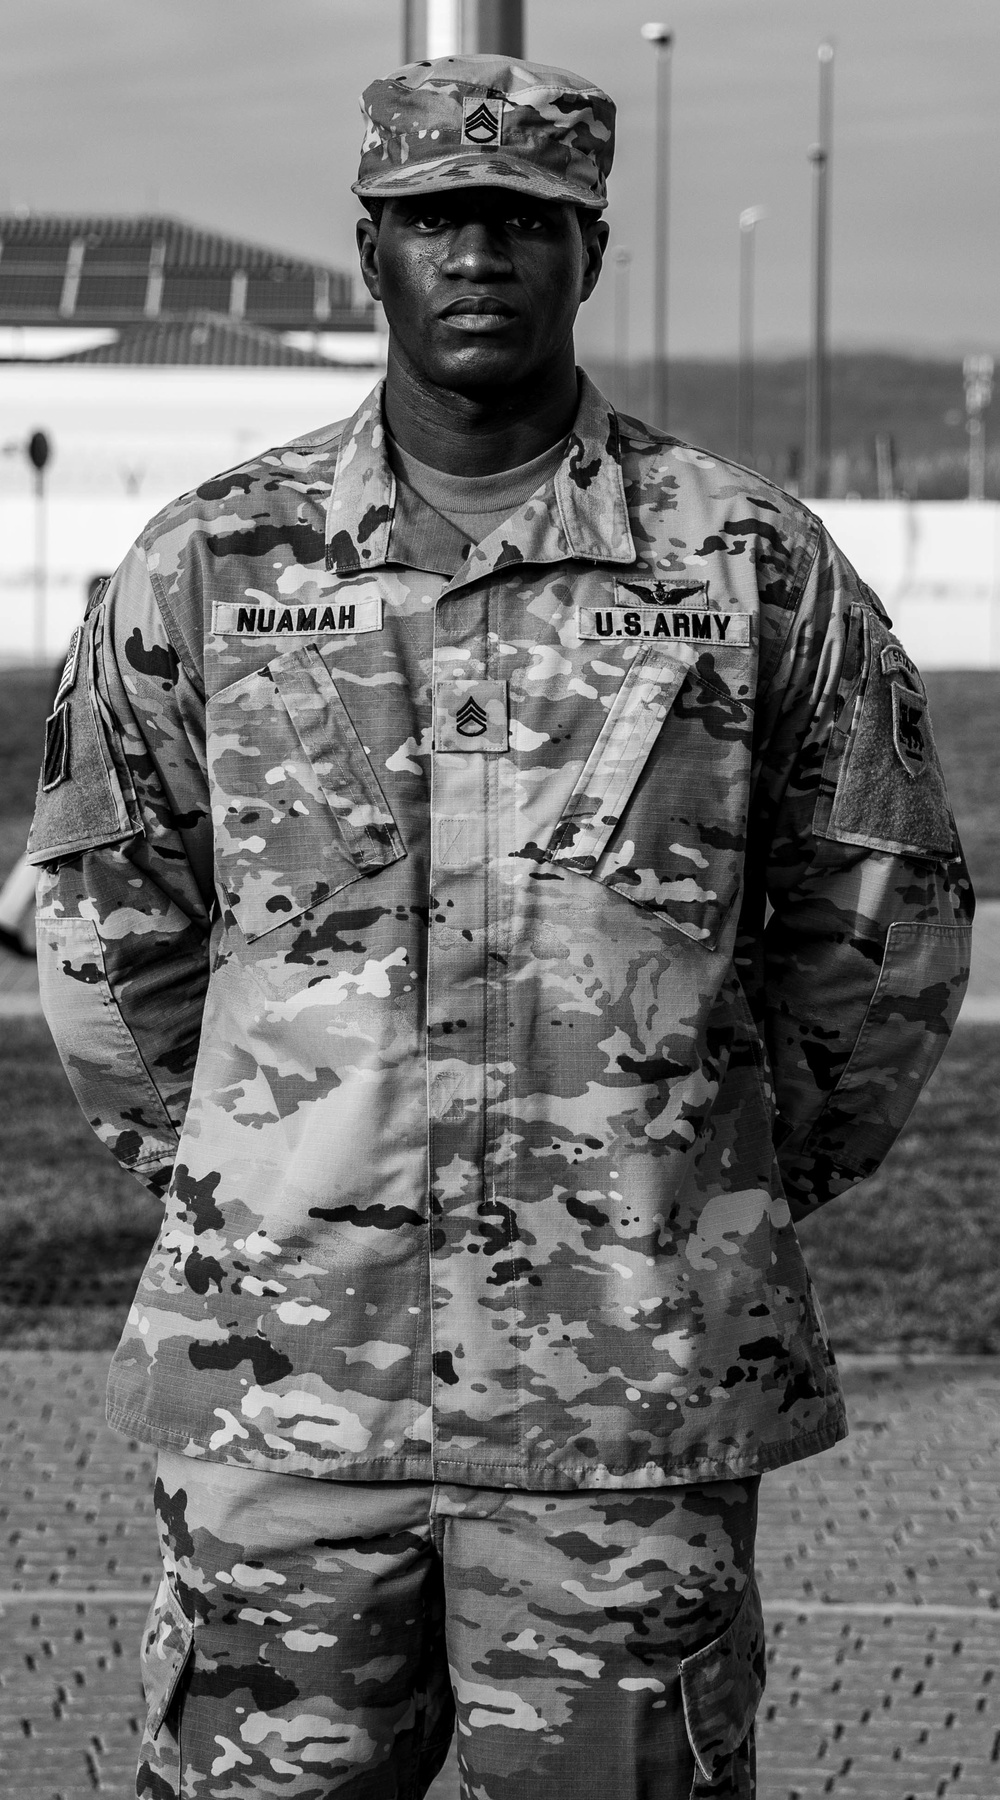 DVIDS - Images - Staff Sgt. Chief Nuamah is promoted to Sgt. 1st